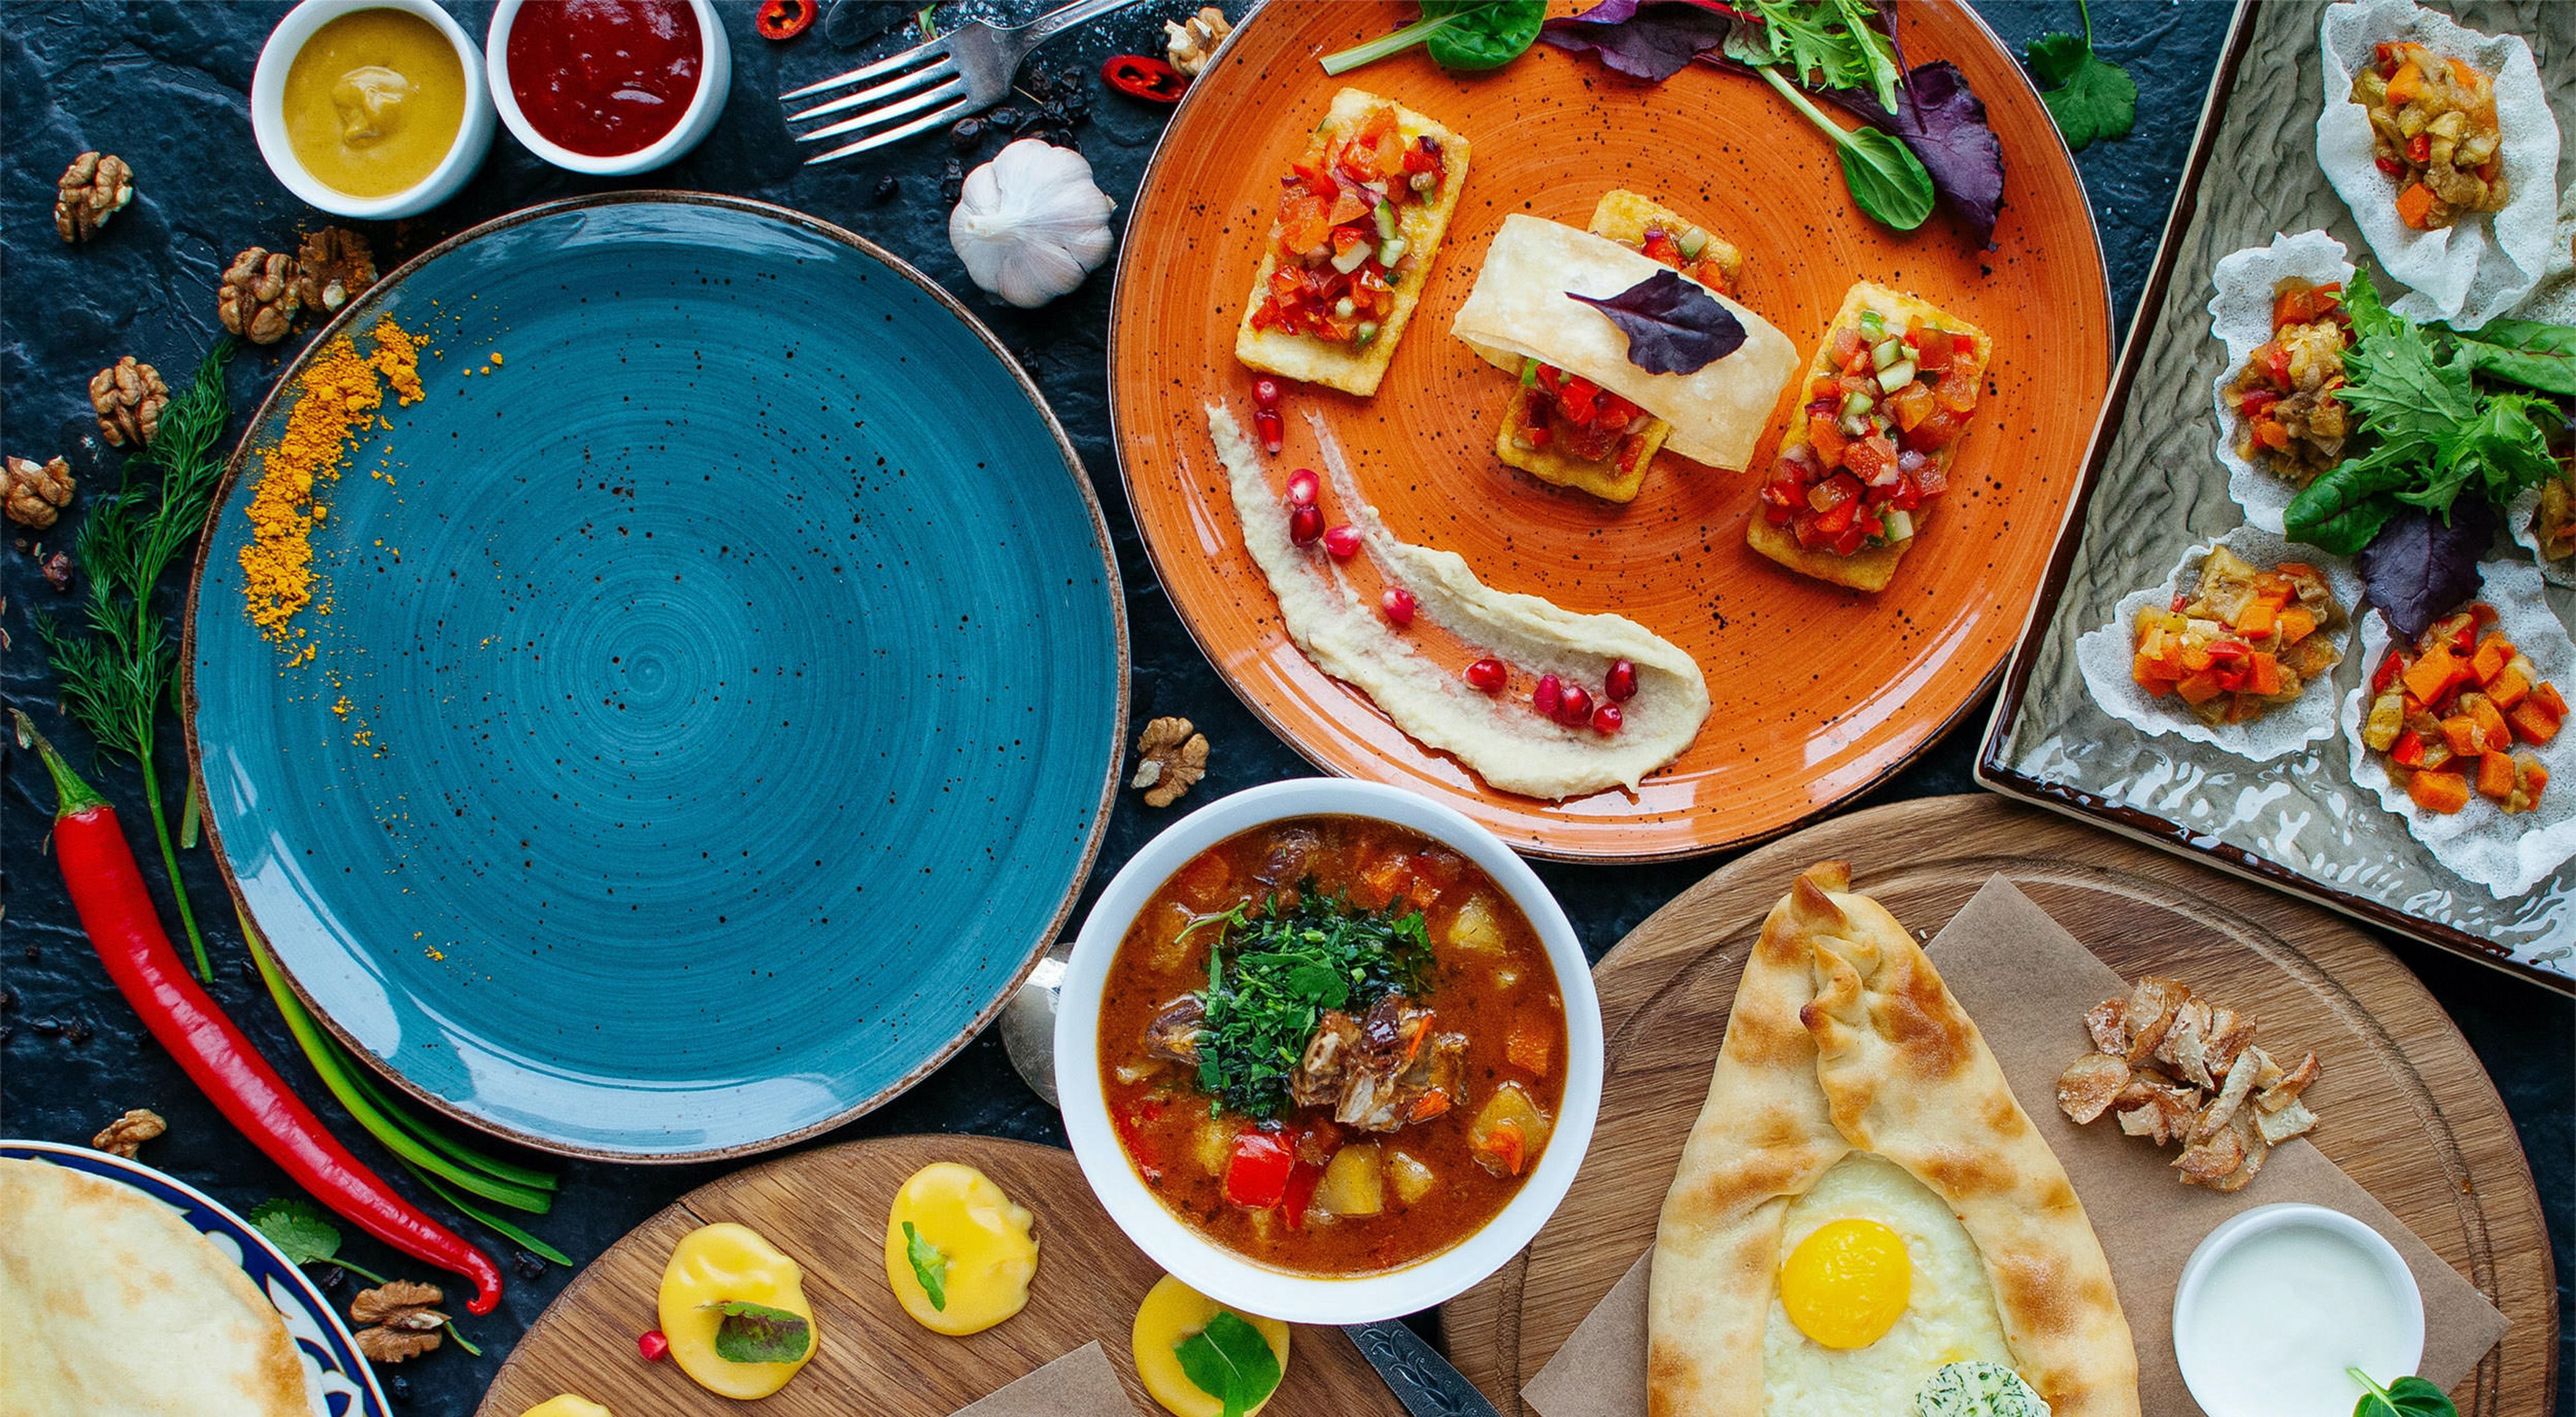 a brightly colored spread of food and plates on a table